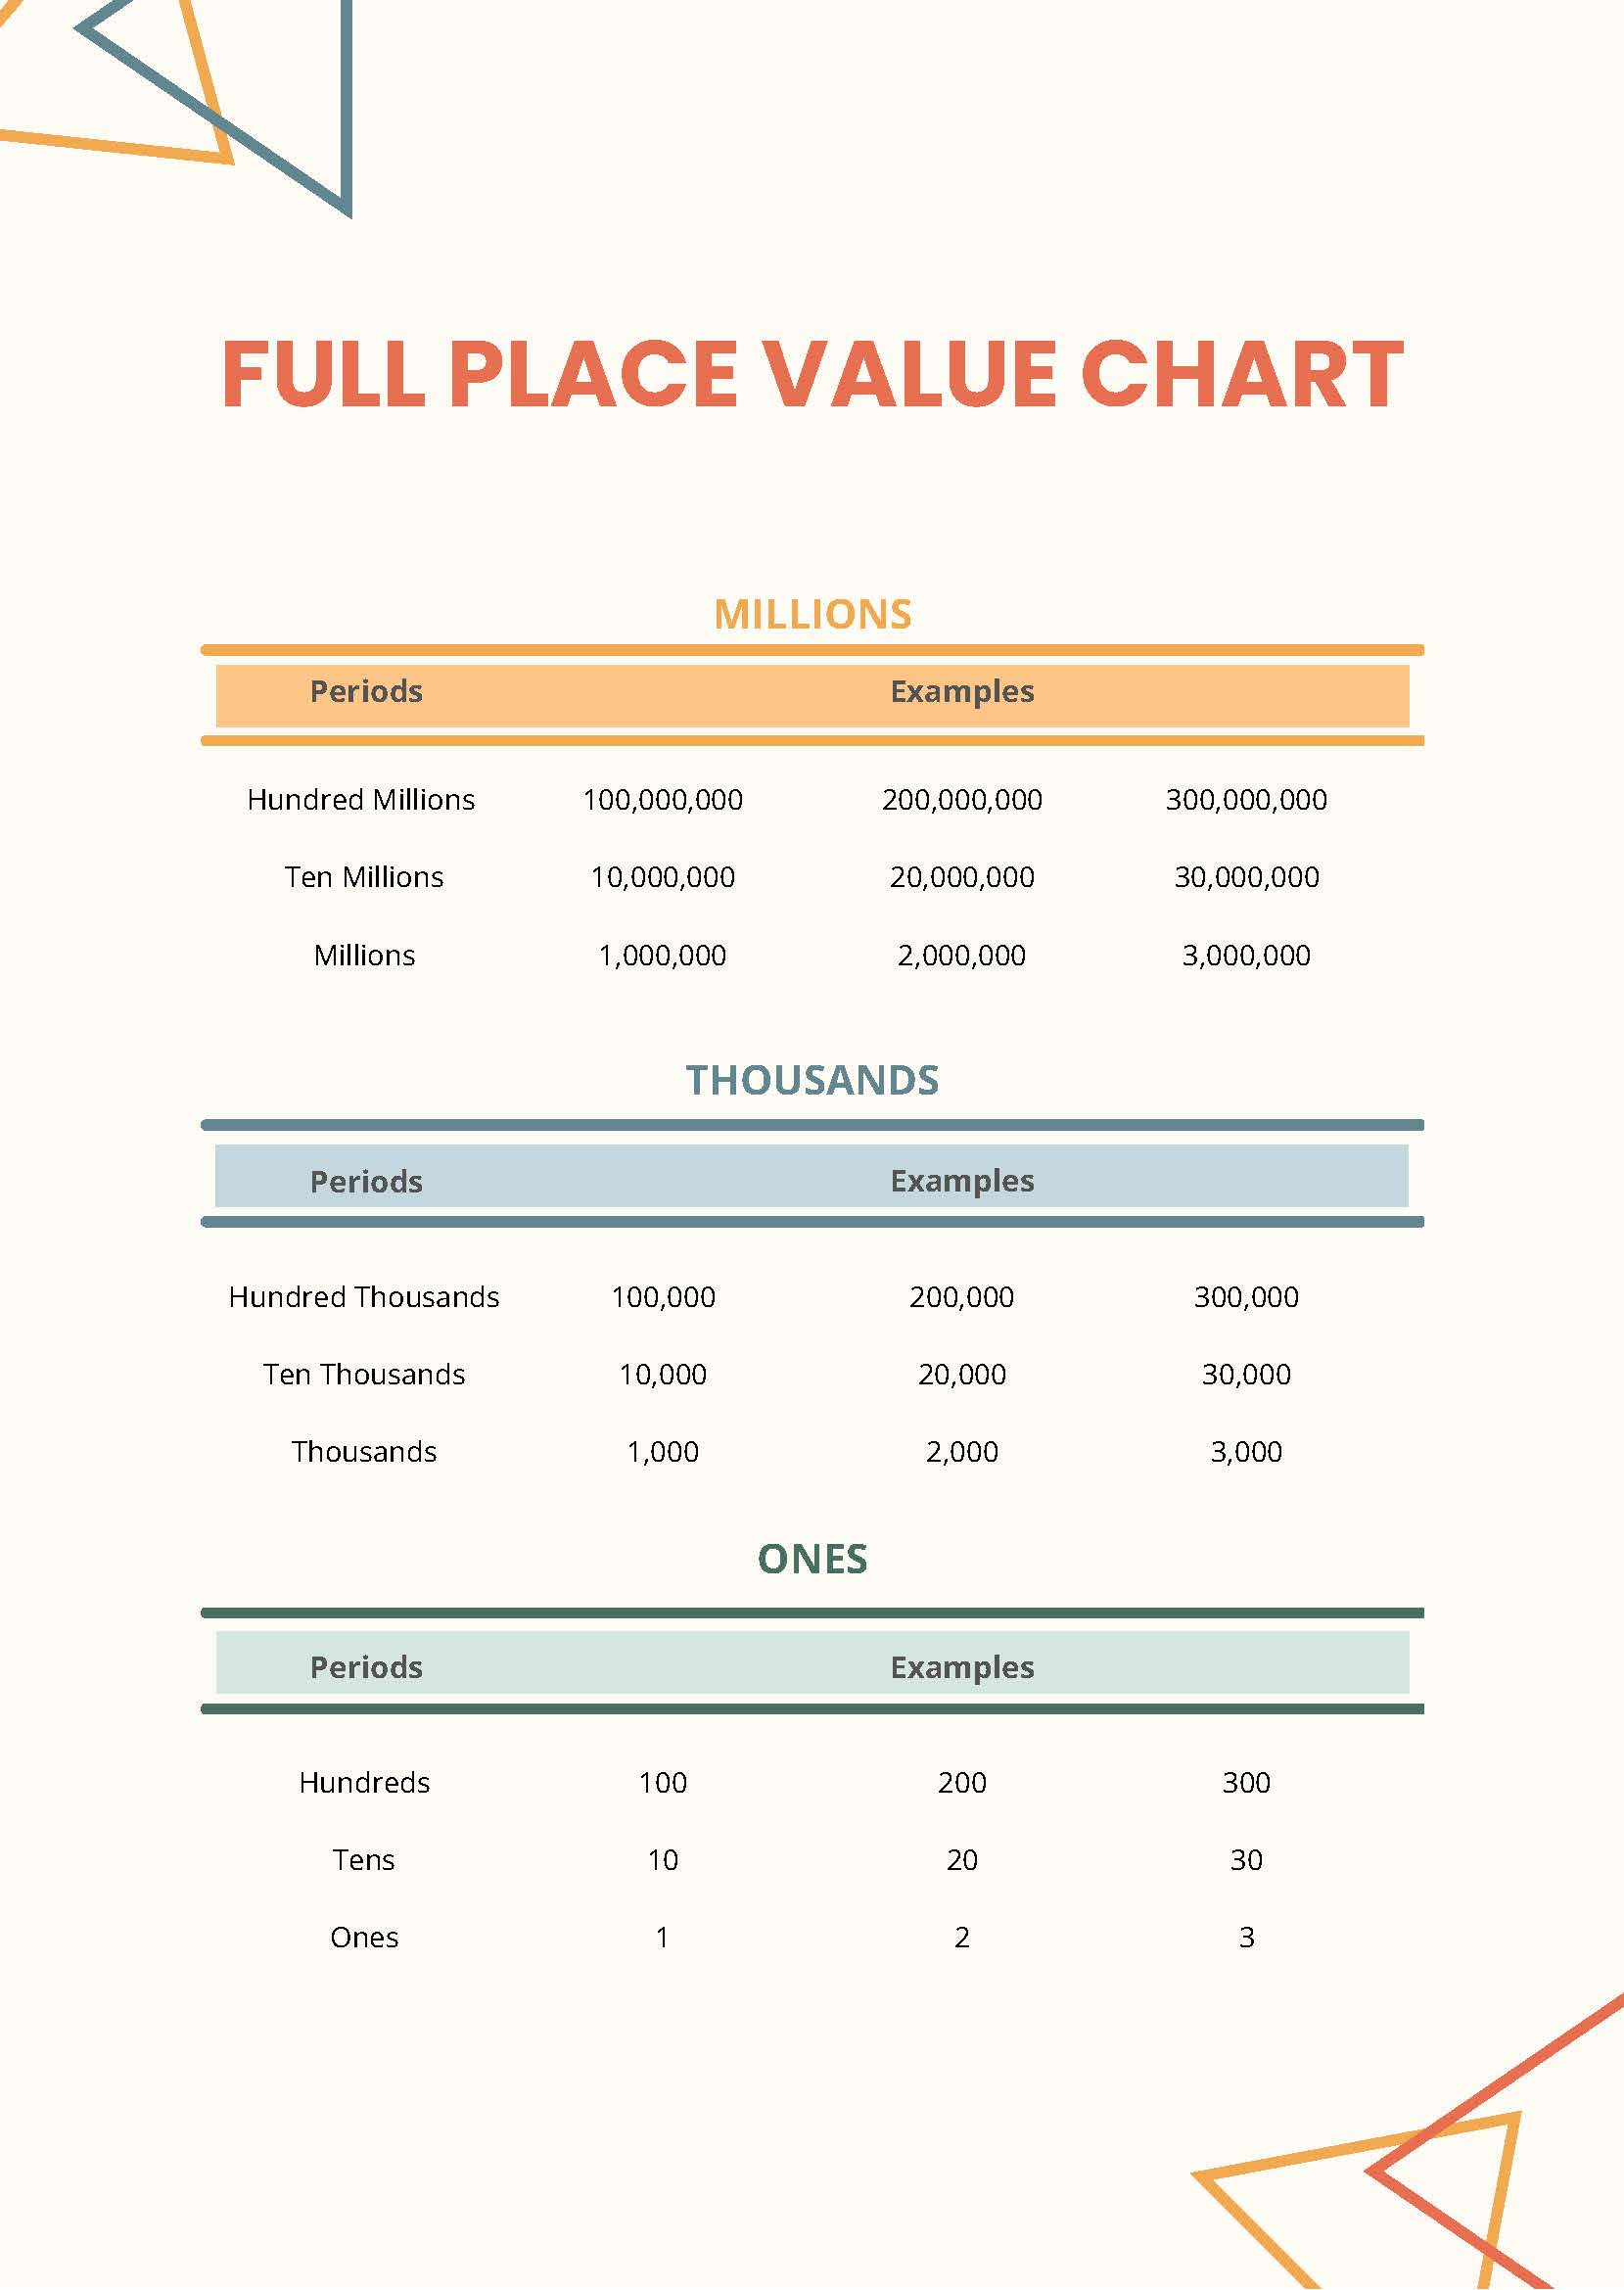 Full Place Value Chart in PDF